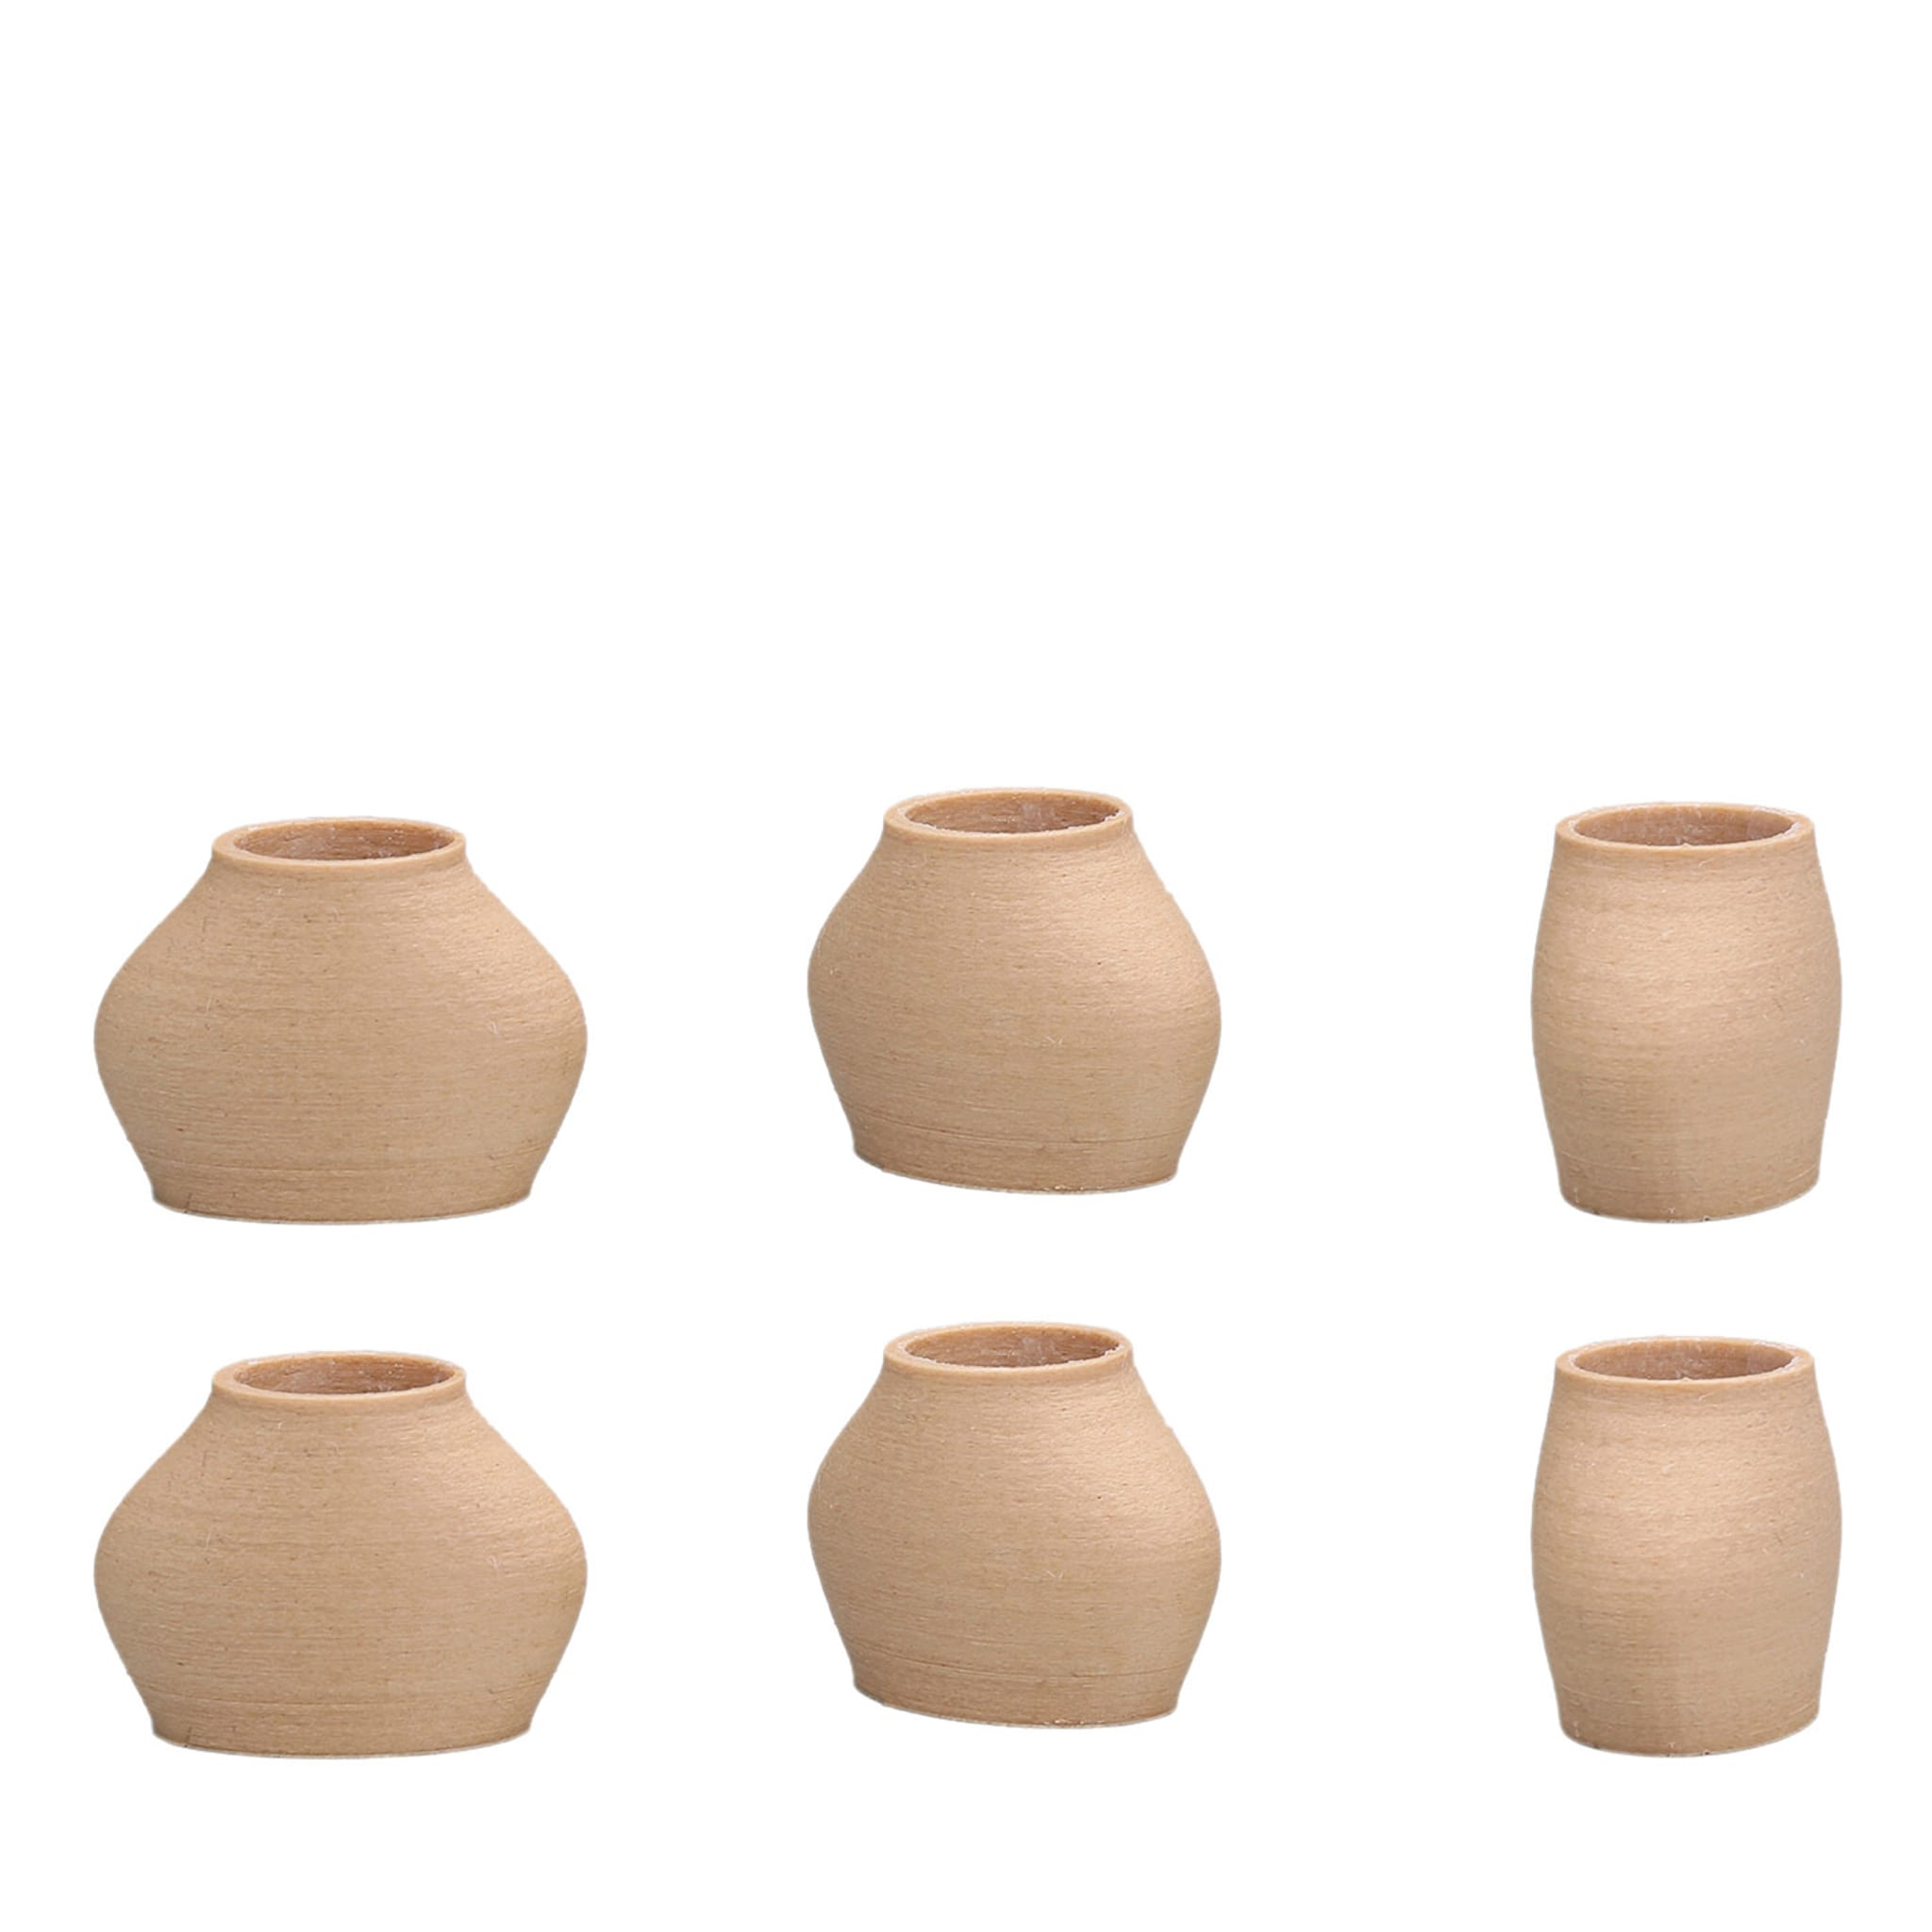 SIRENA ENTRY SET OF 6 WOOD CANDLE HOLDERS - Main view